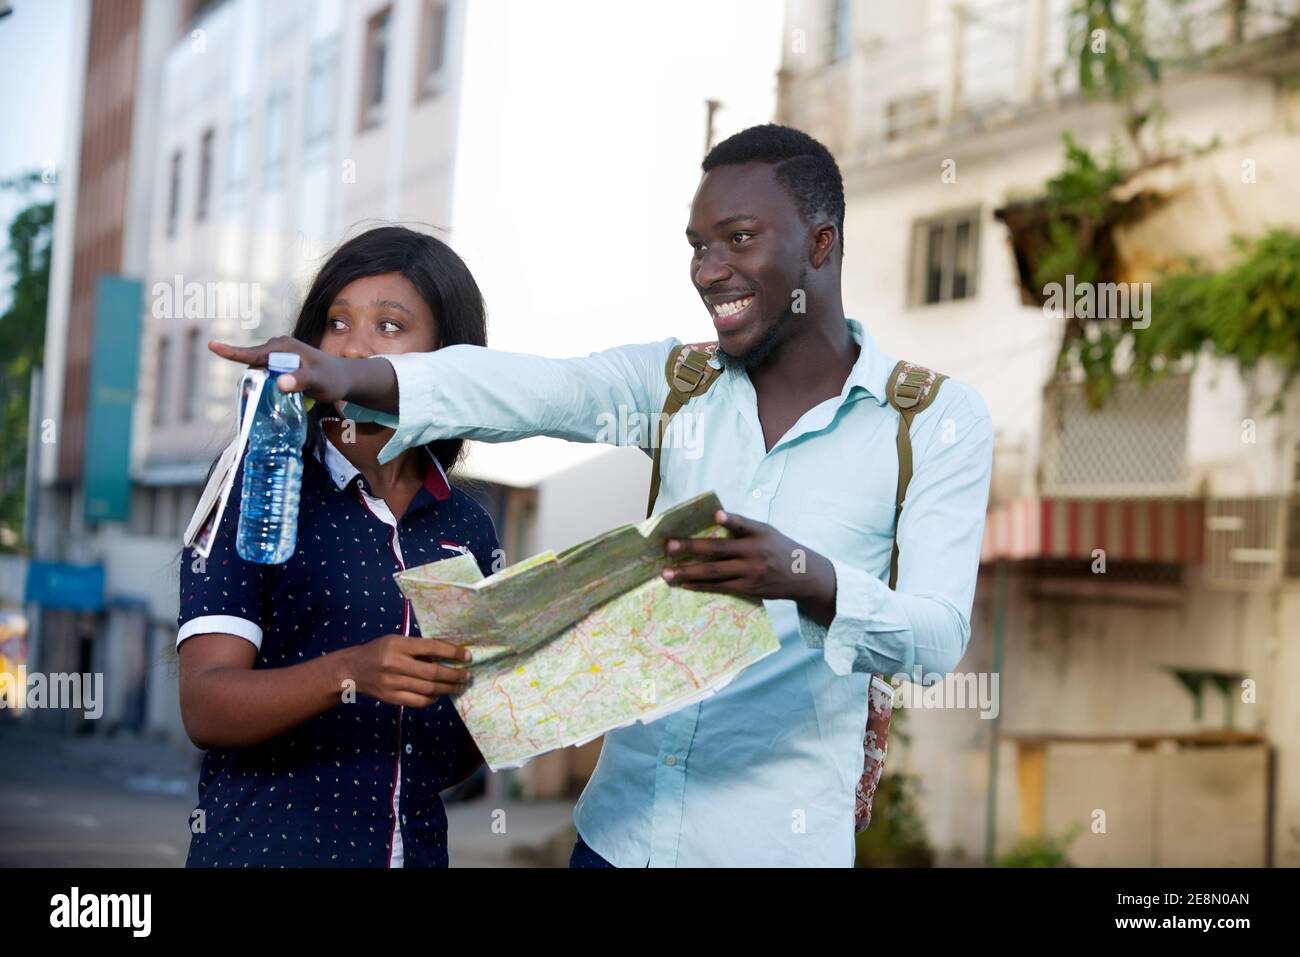 young tourist standing outdoors showing something to his friend with map in hand smiling Stock Photo